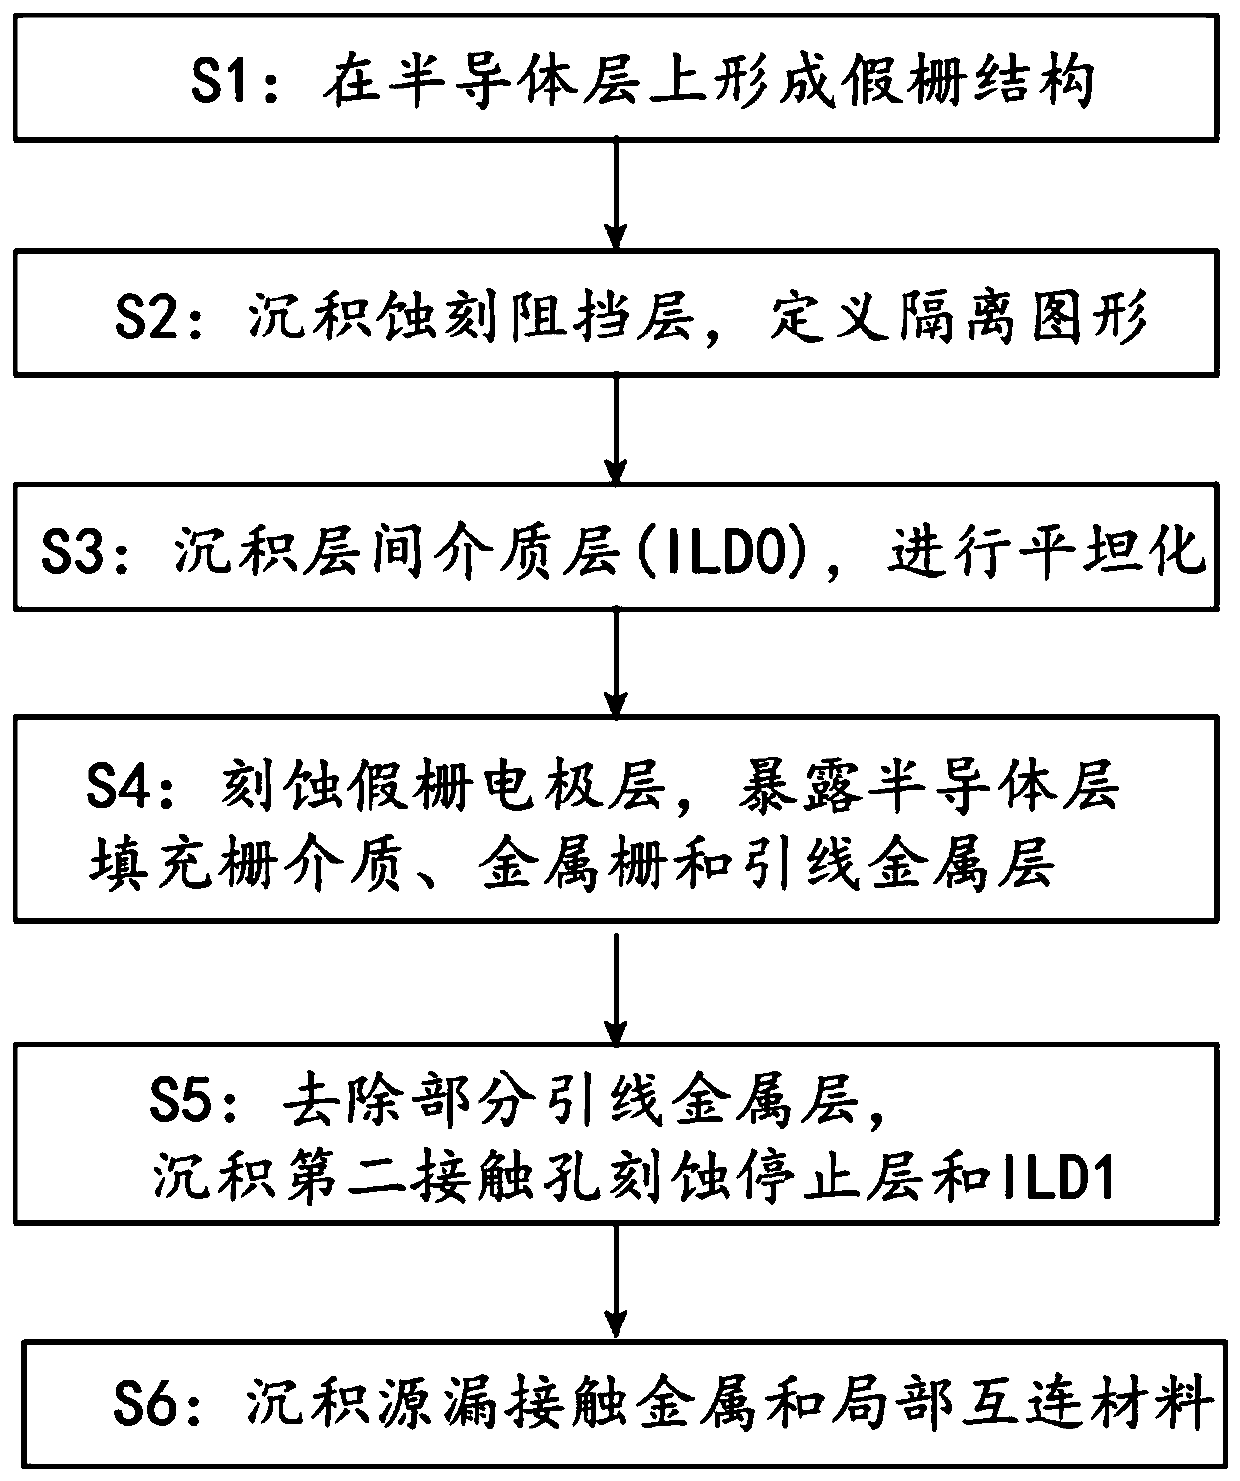 Global manufacturing method for source-drain metal of carbon nanotube device